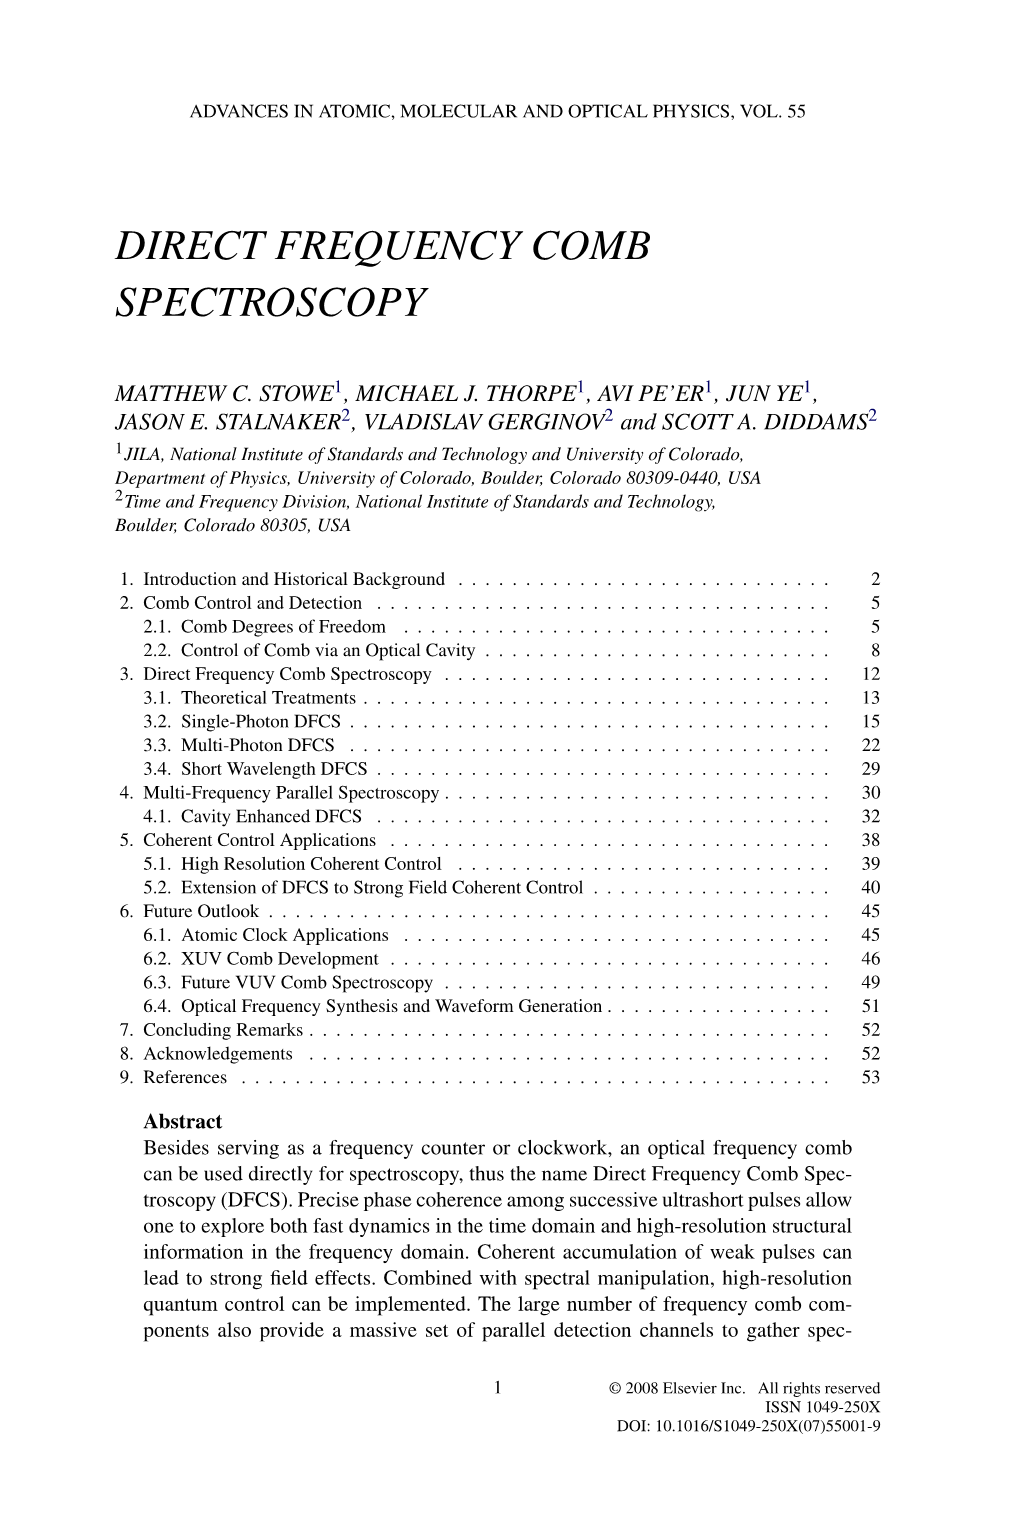 Direct Frequency Comb Spectroscopy